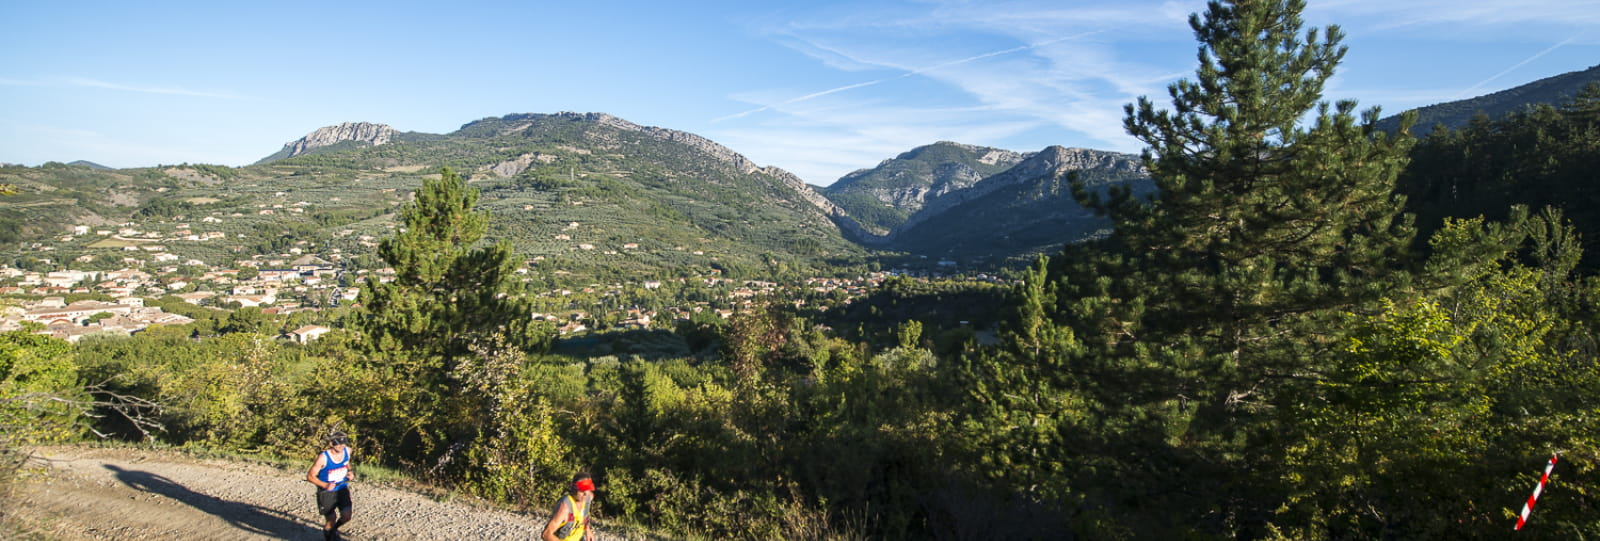 Trail park of the Baronnies in Drôme Provençale